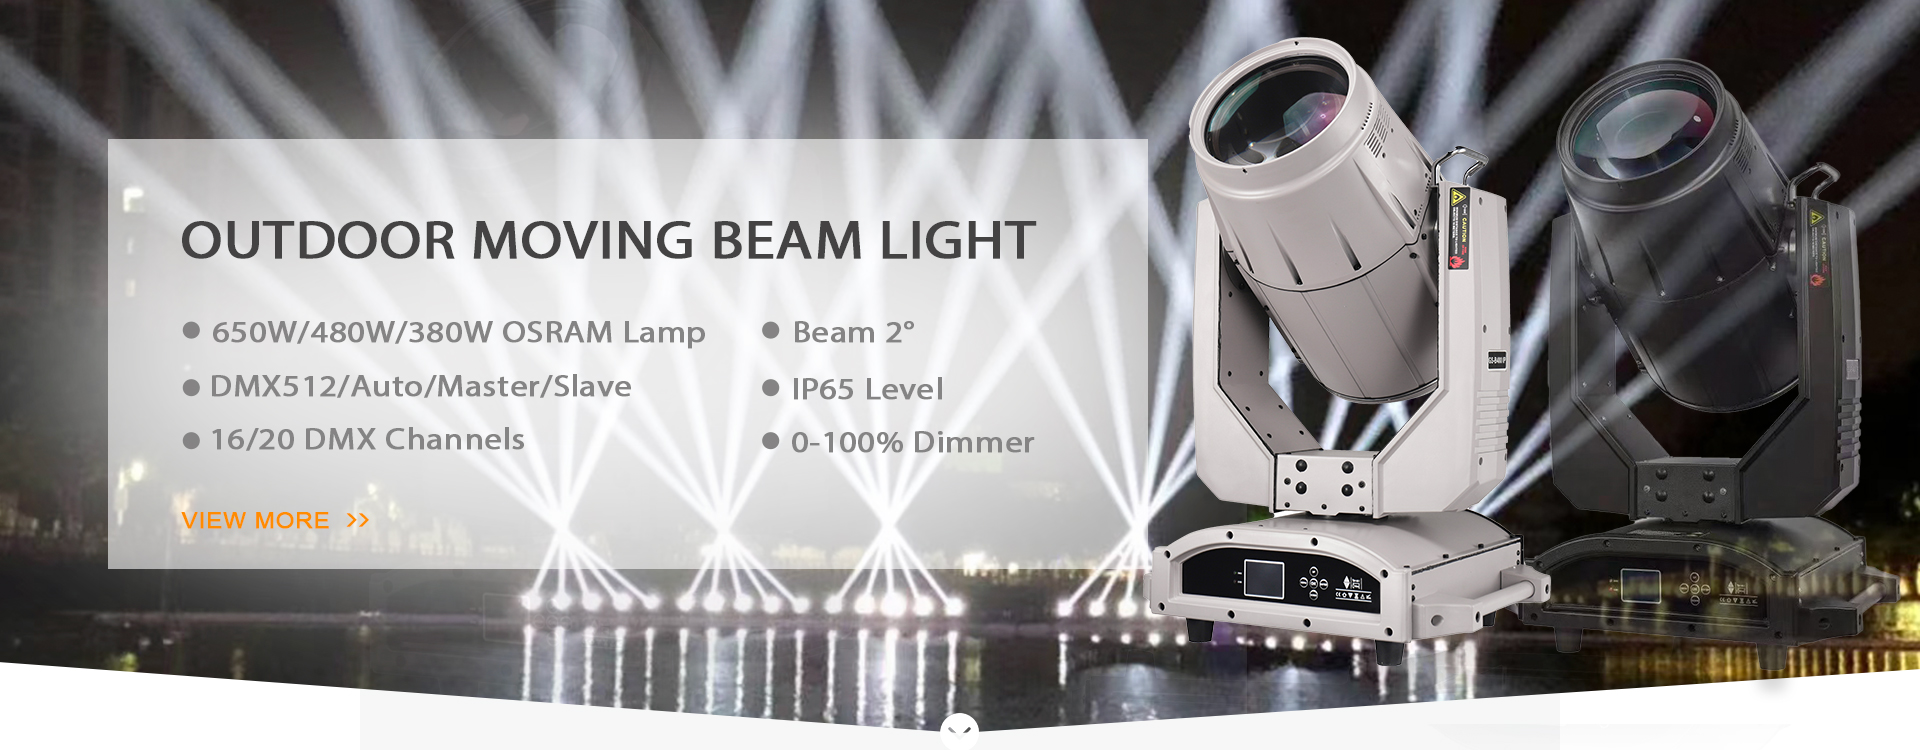 600W OUTDOOR MOVING HEAD BEAM